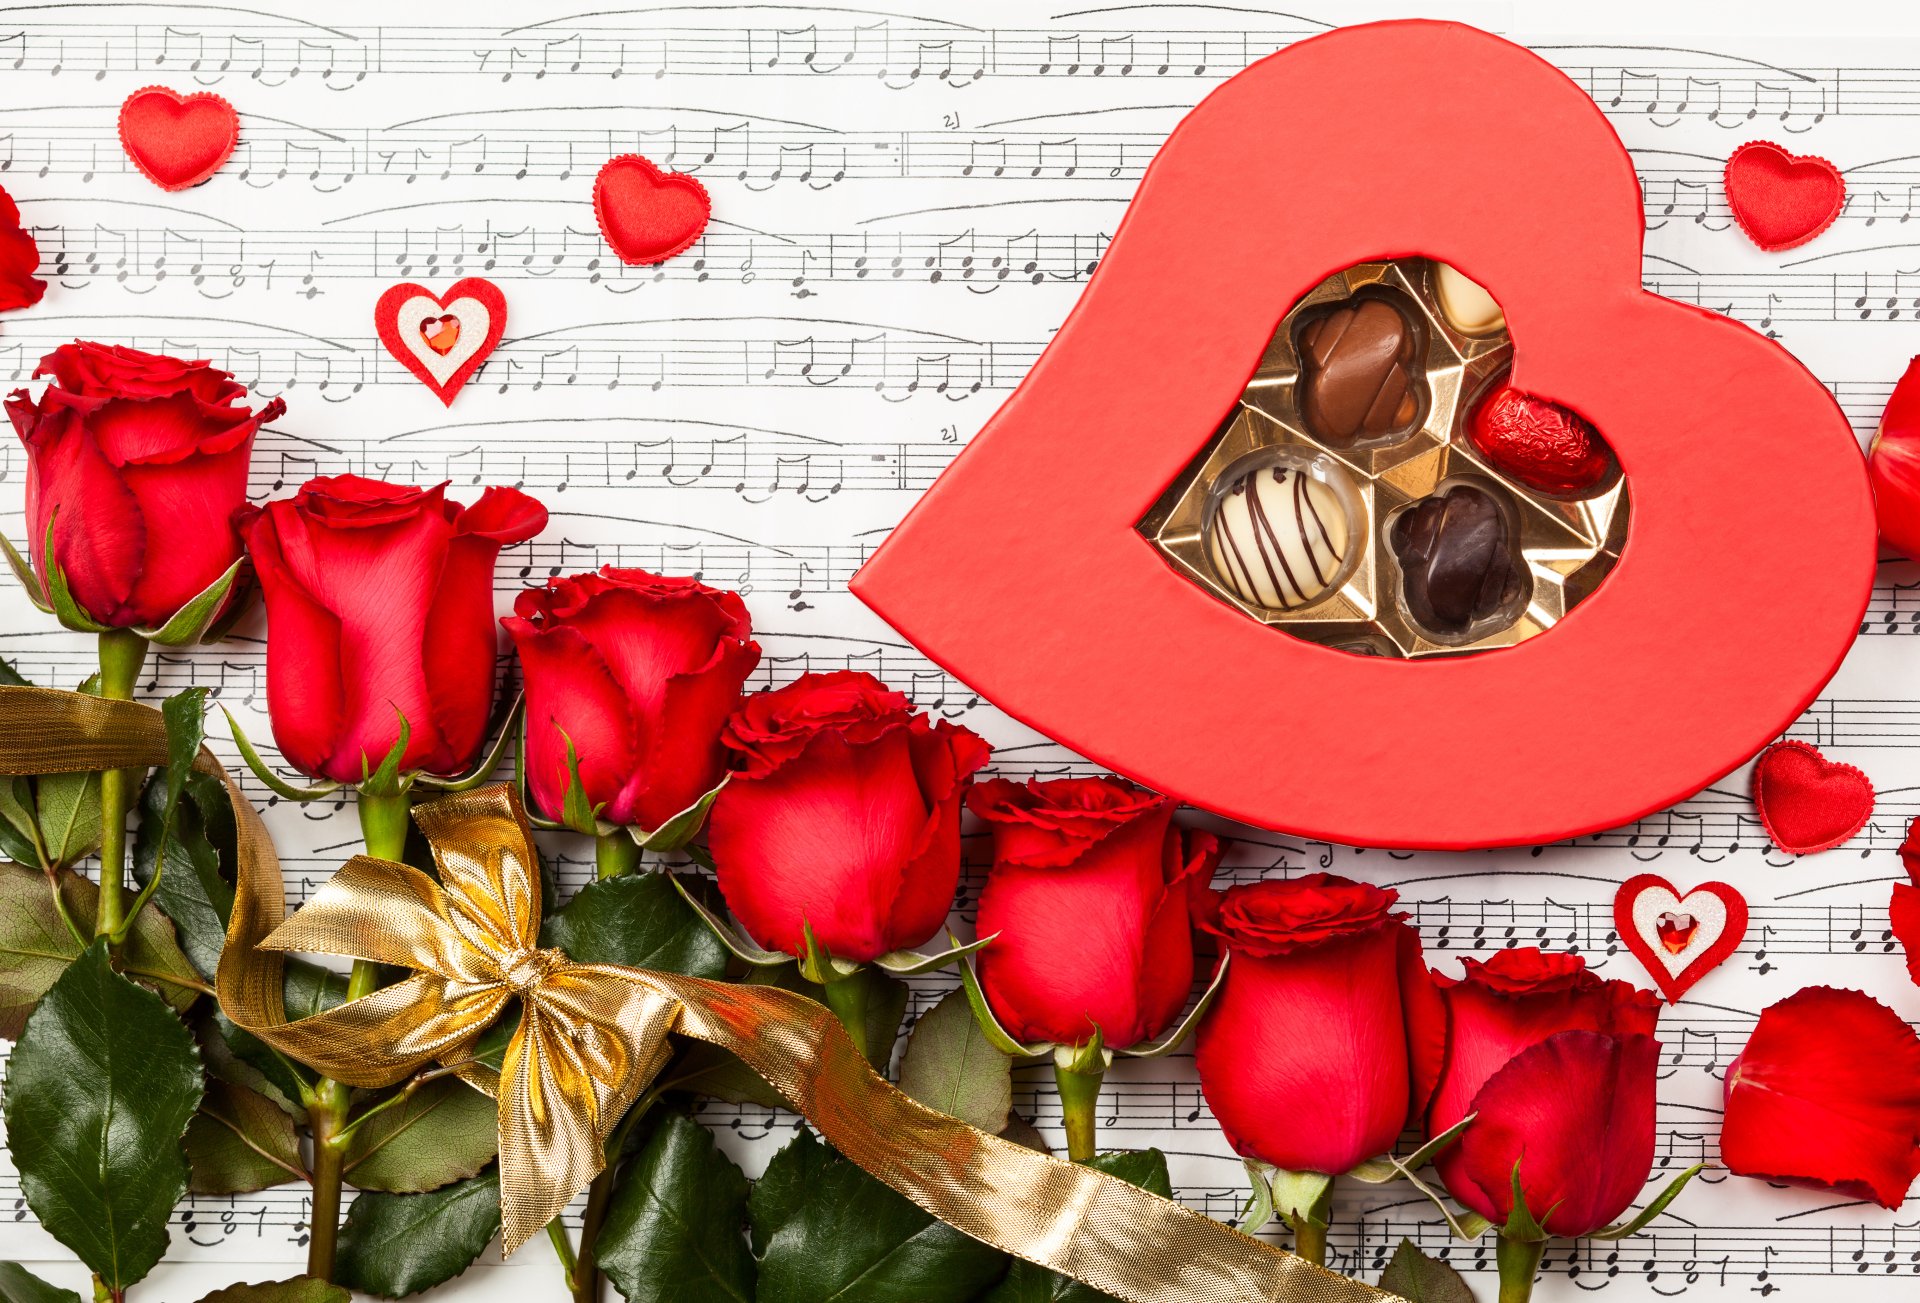 Download Chocolate Heart Sheet Music Ribbon Red Rose Rose Holiday Valentines Day 4k Ultra Hd 5603